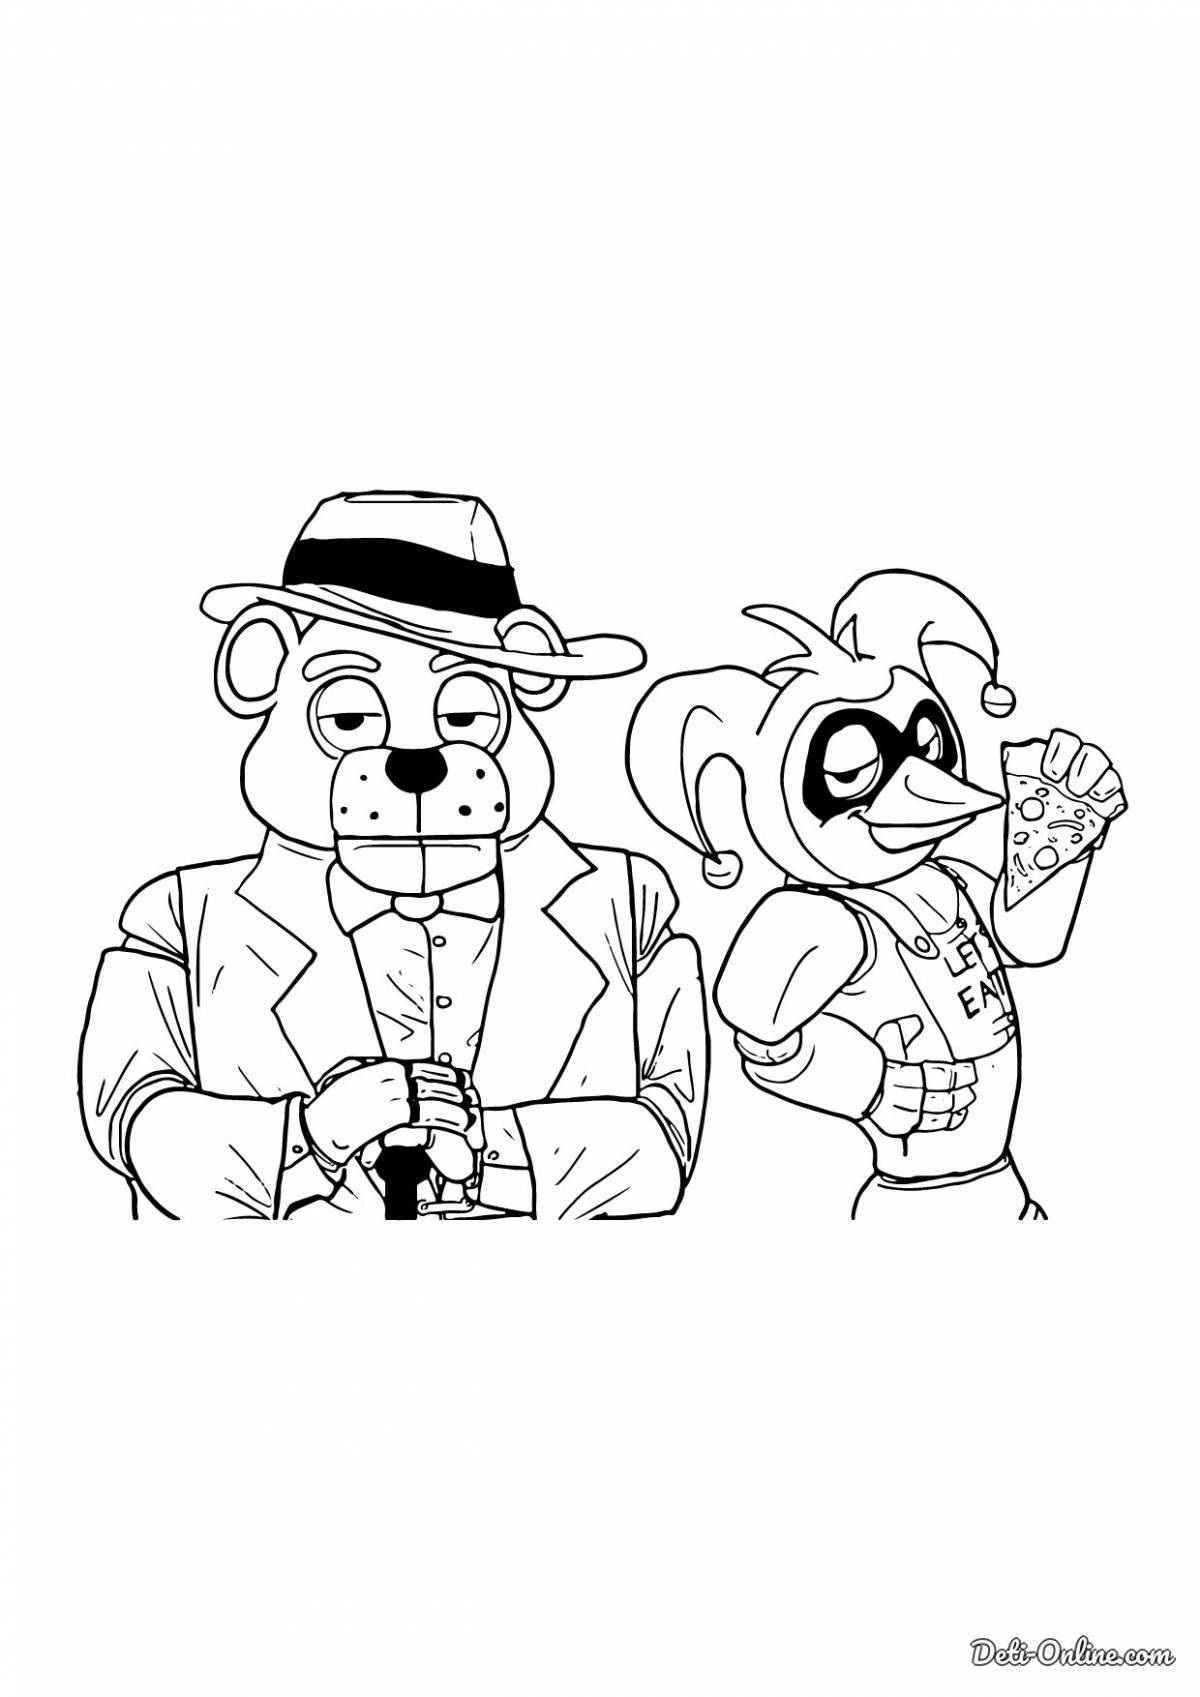 Charming left animatronic coloring book